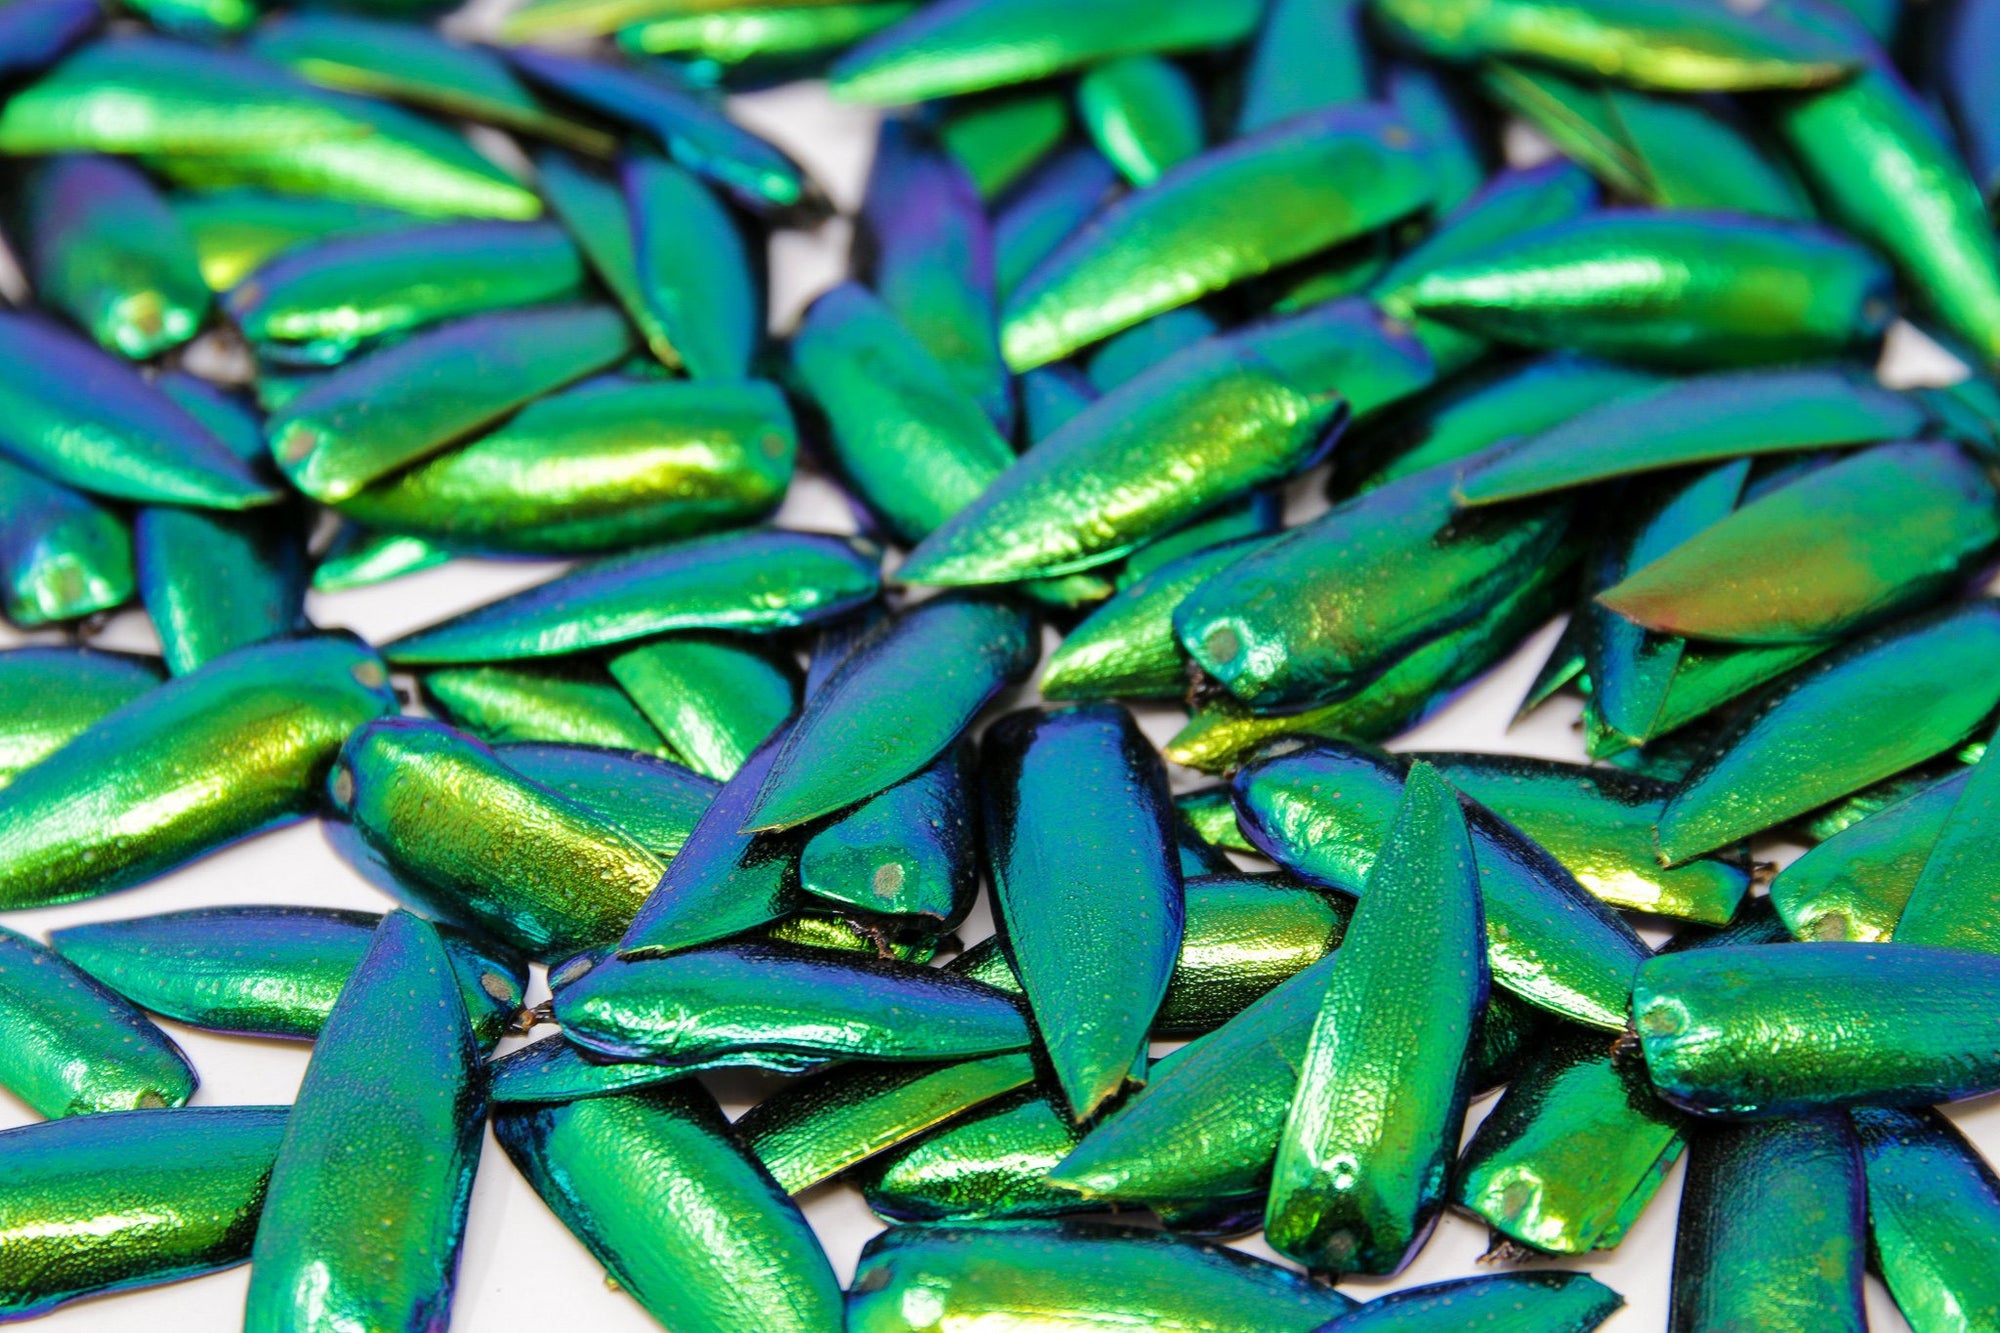 WHOLESALE 1,000 Jewel Beetle Wings | Sternocera aequisignata | Iridescent Wing Cases Ethically sourced